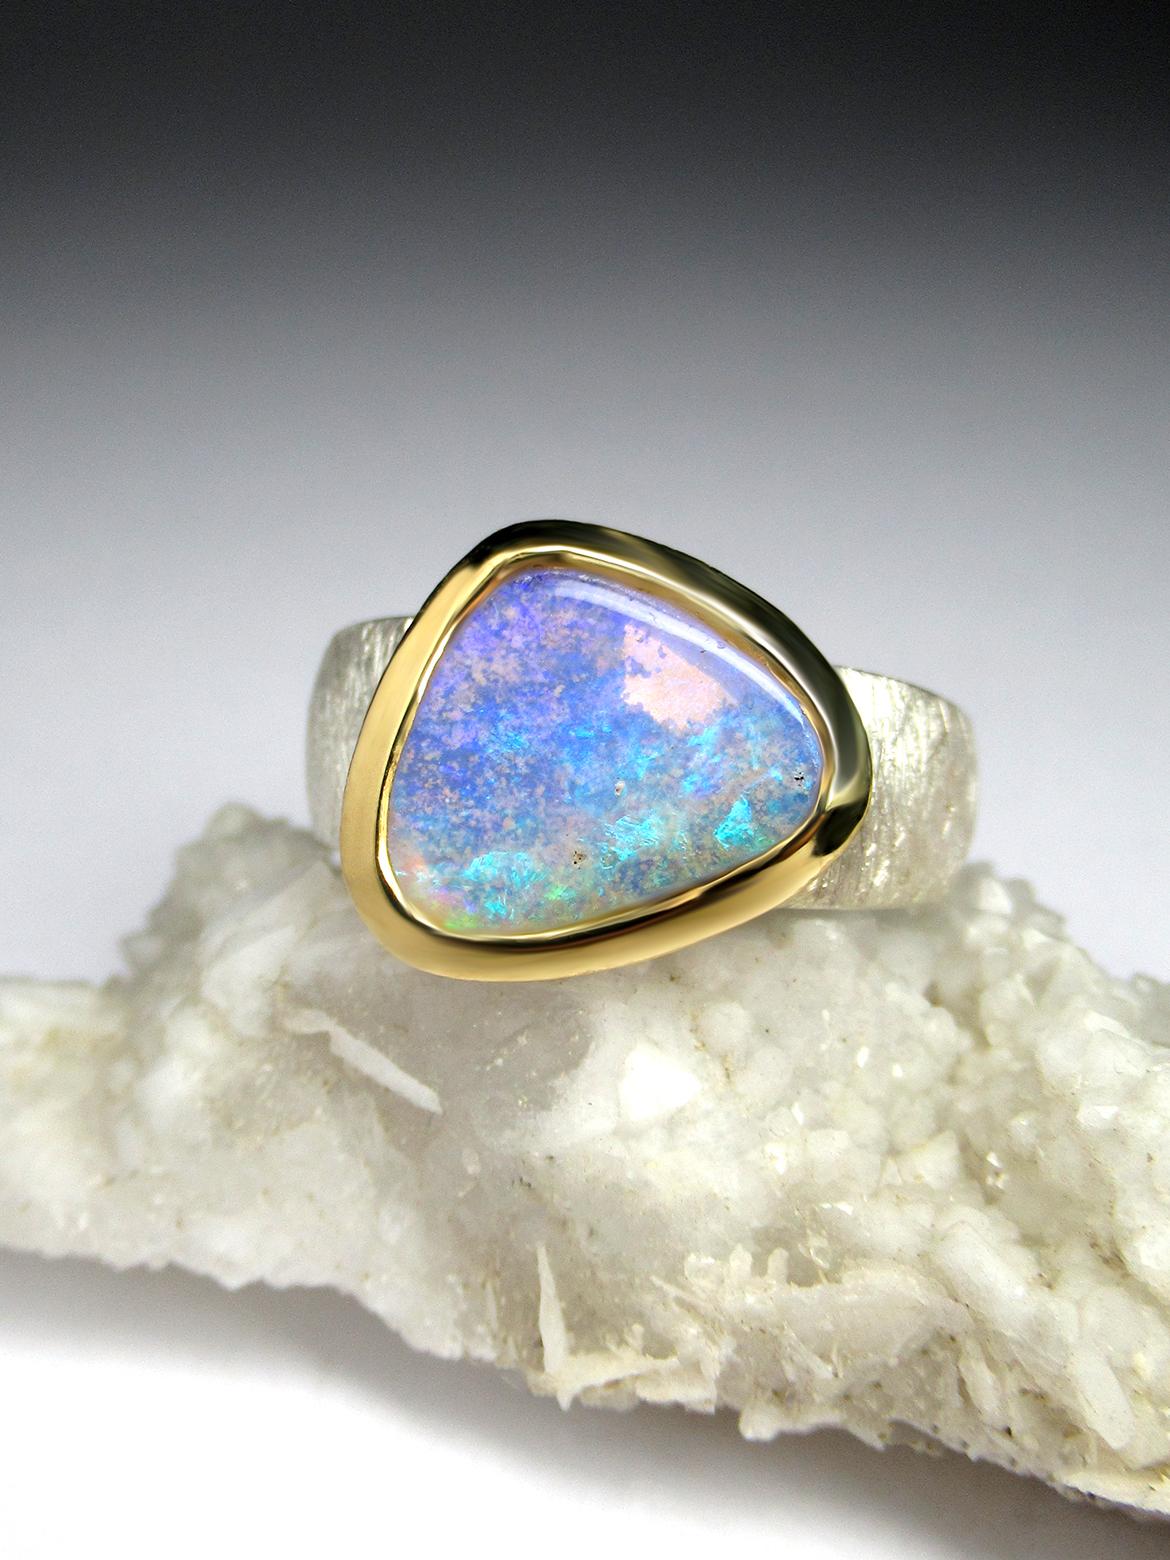 Silver and 18K gold plated ring with natural Neon crystal Opal 
Opal gemstone origin - Australia 
opal measurements  - 0.39 x 0.47 in / 10 х 12 mm
ring weight - 7.2 grams
ring size - 7 1/4 US 
ref No 2451

Worldwide shipping from Berlin, Germany.